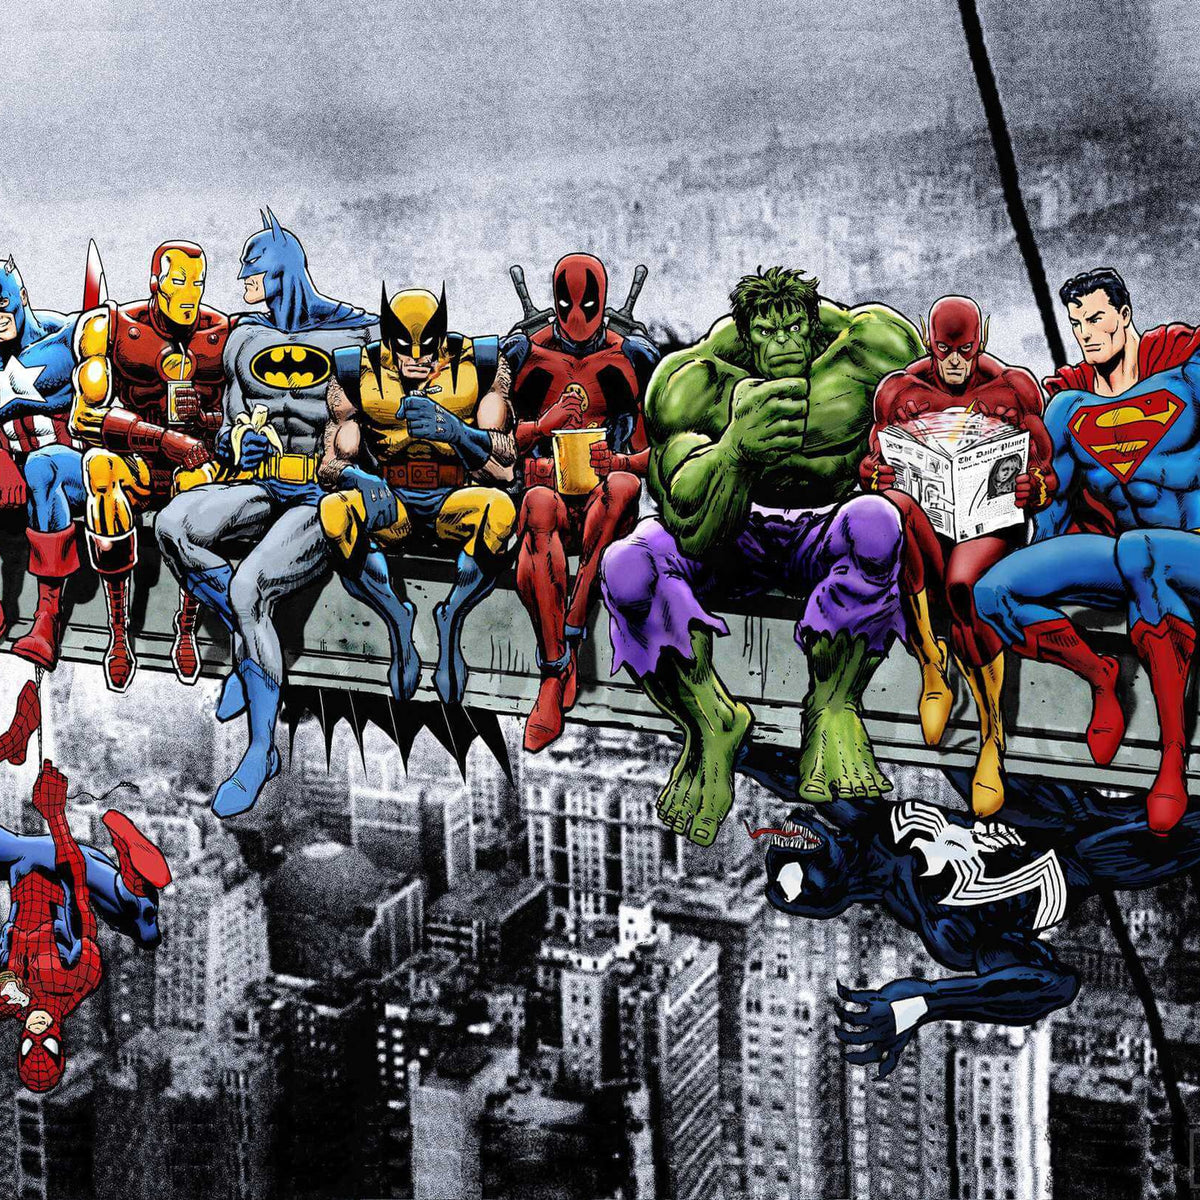 Superheroes Lunch Atop A Skyscraper - 16"x20" (40x50cm)-Canvas by Numbers US